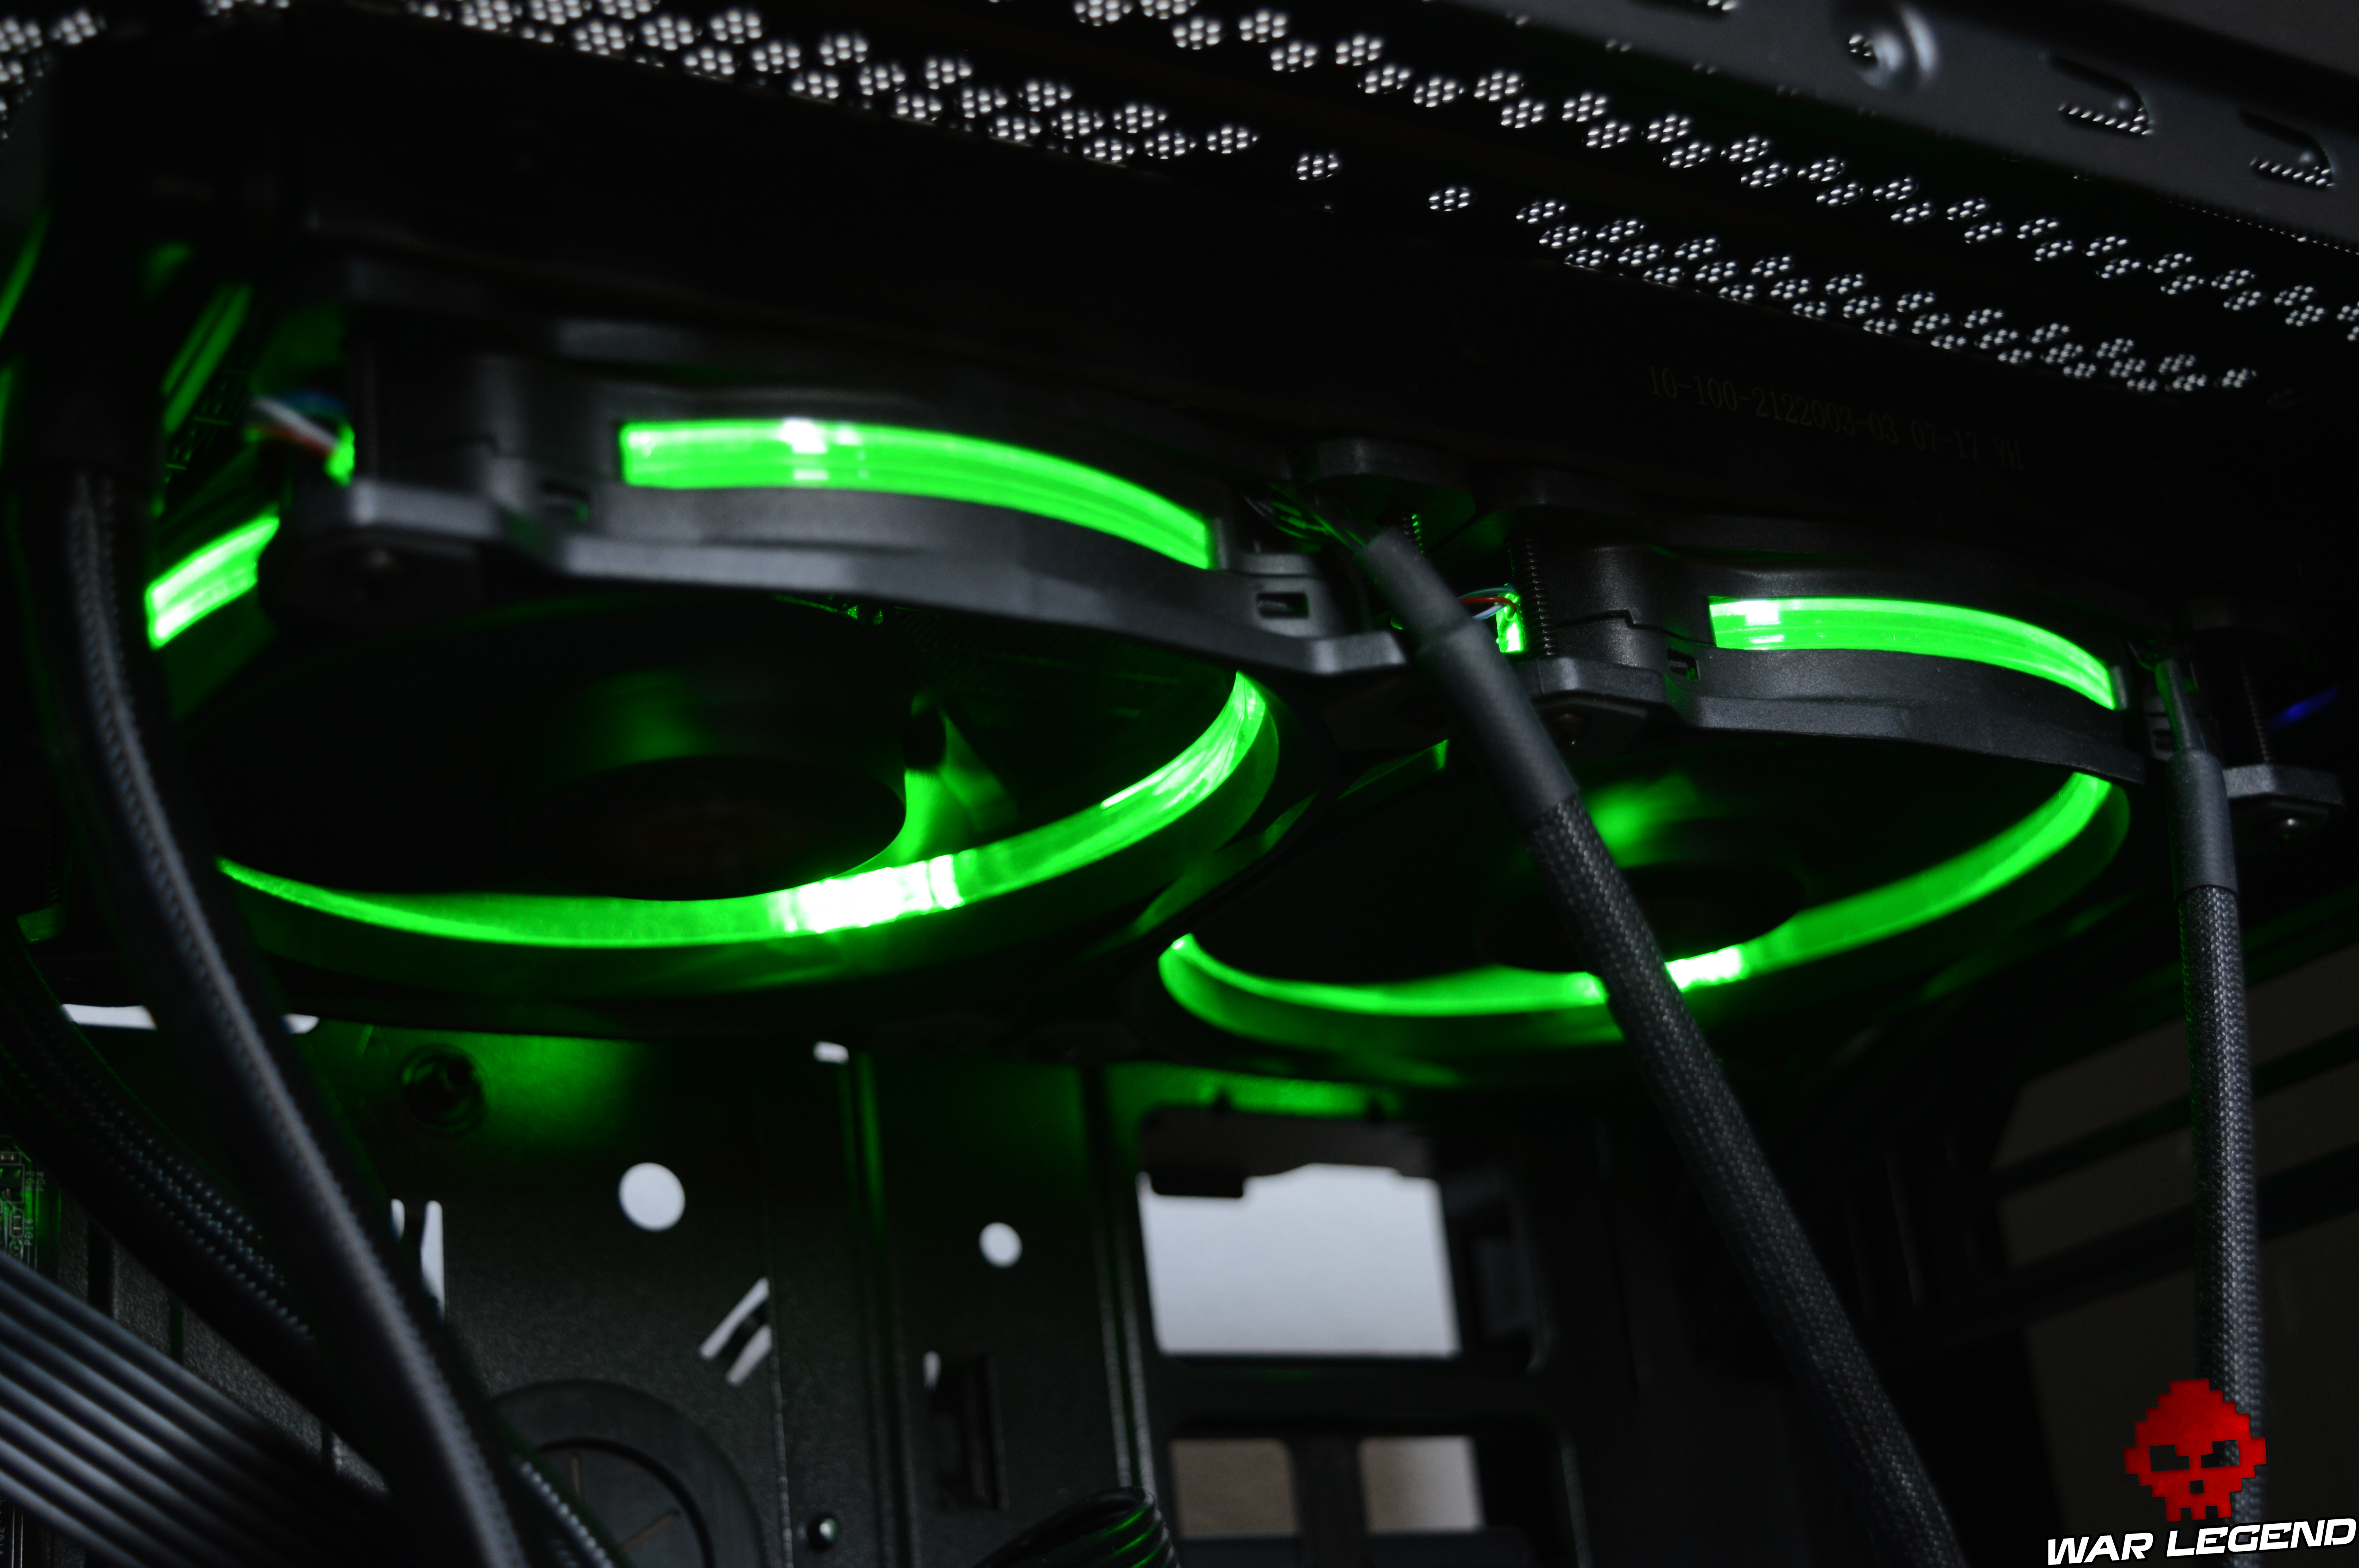 Test Thermaltake Water 3.0 Riing RGB 240 - Le water-cooling pour les nuls